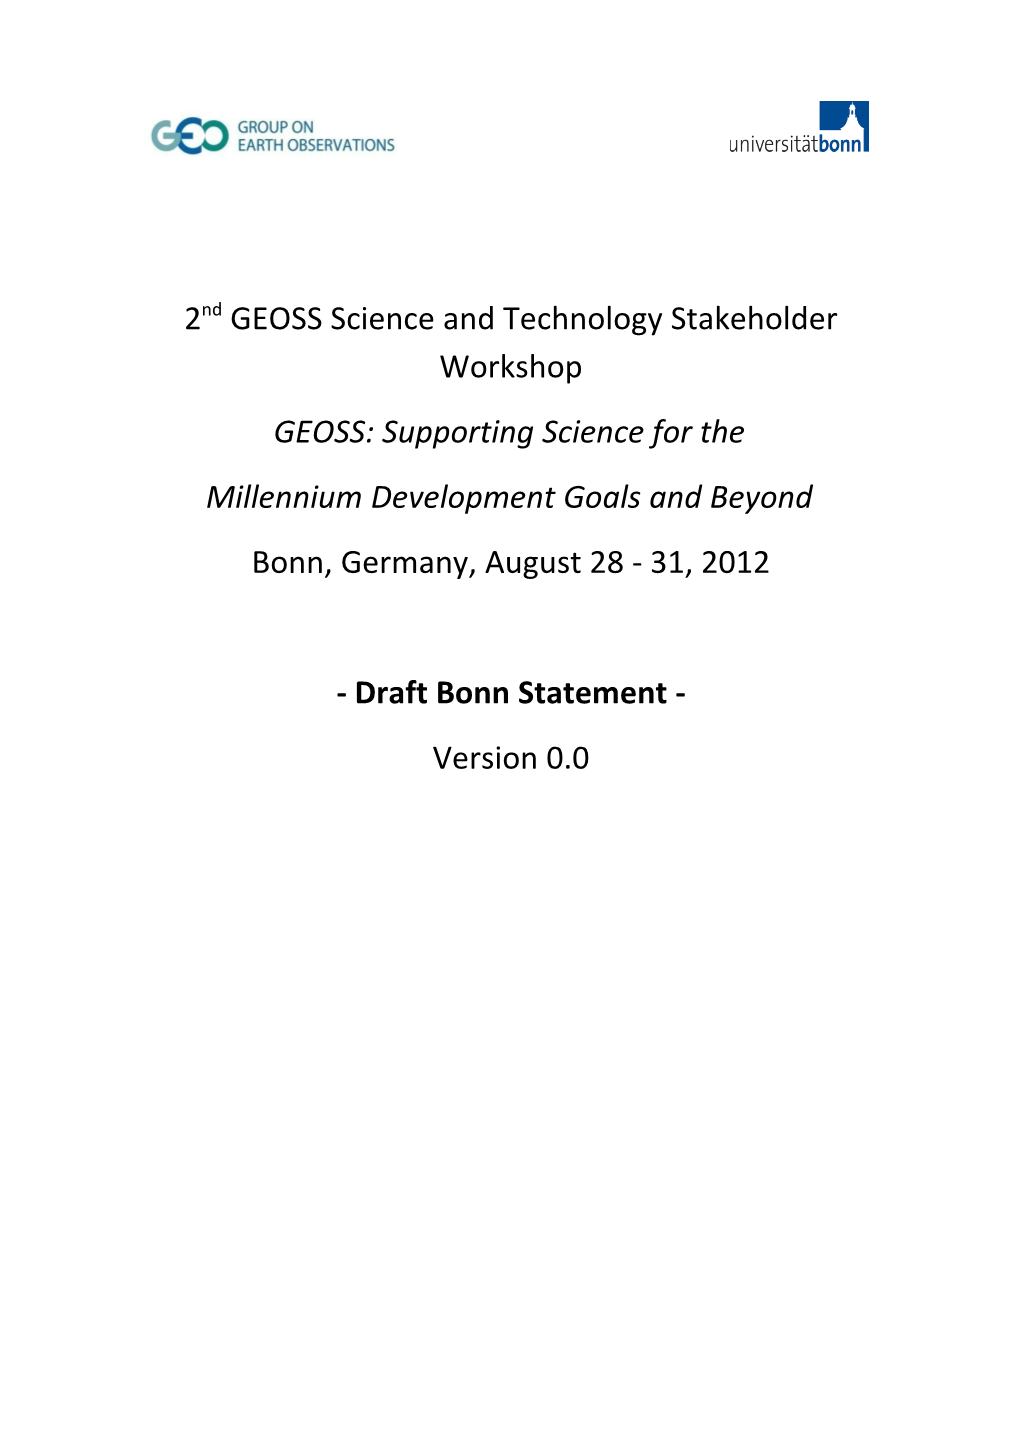 GEOSS:Supportingscienceforthe